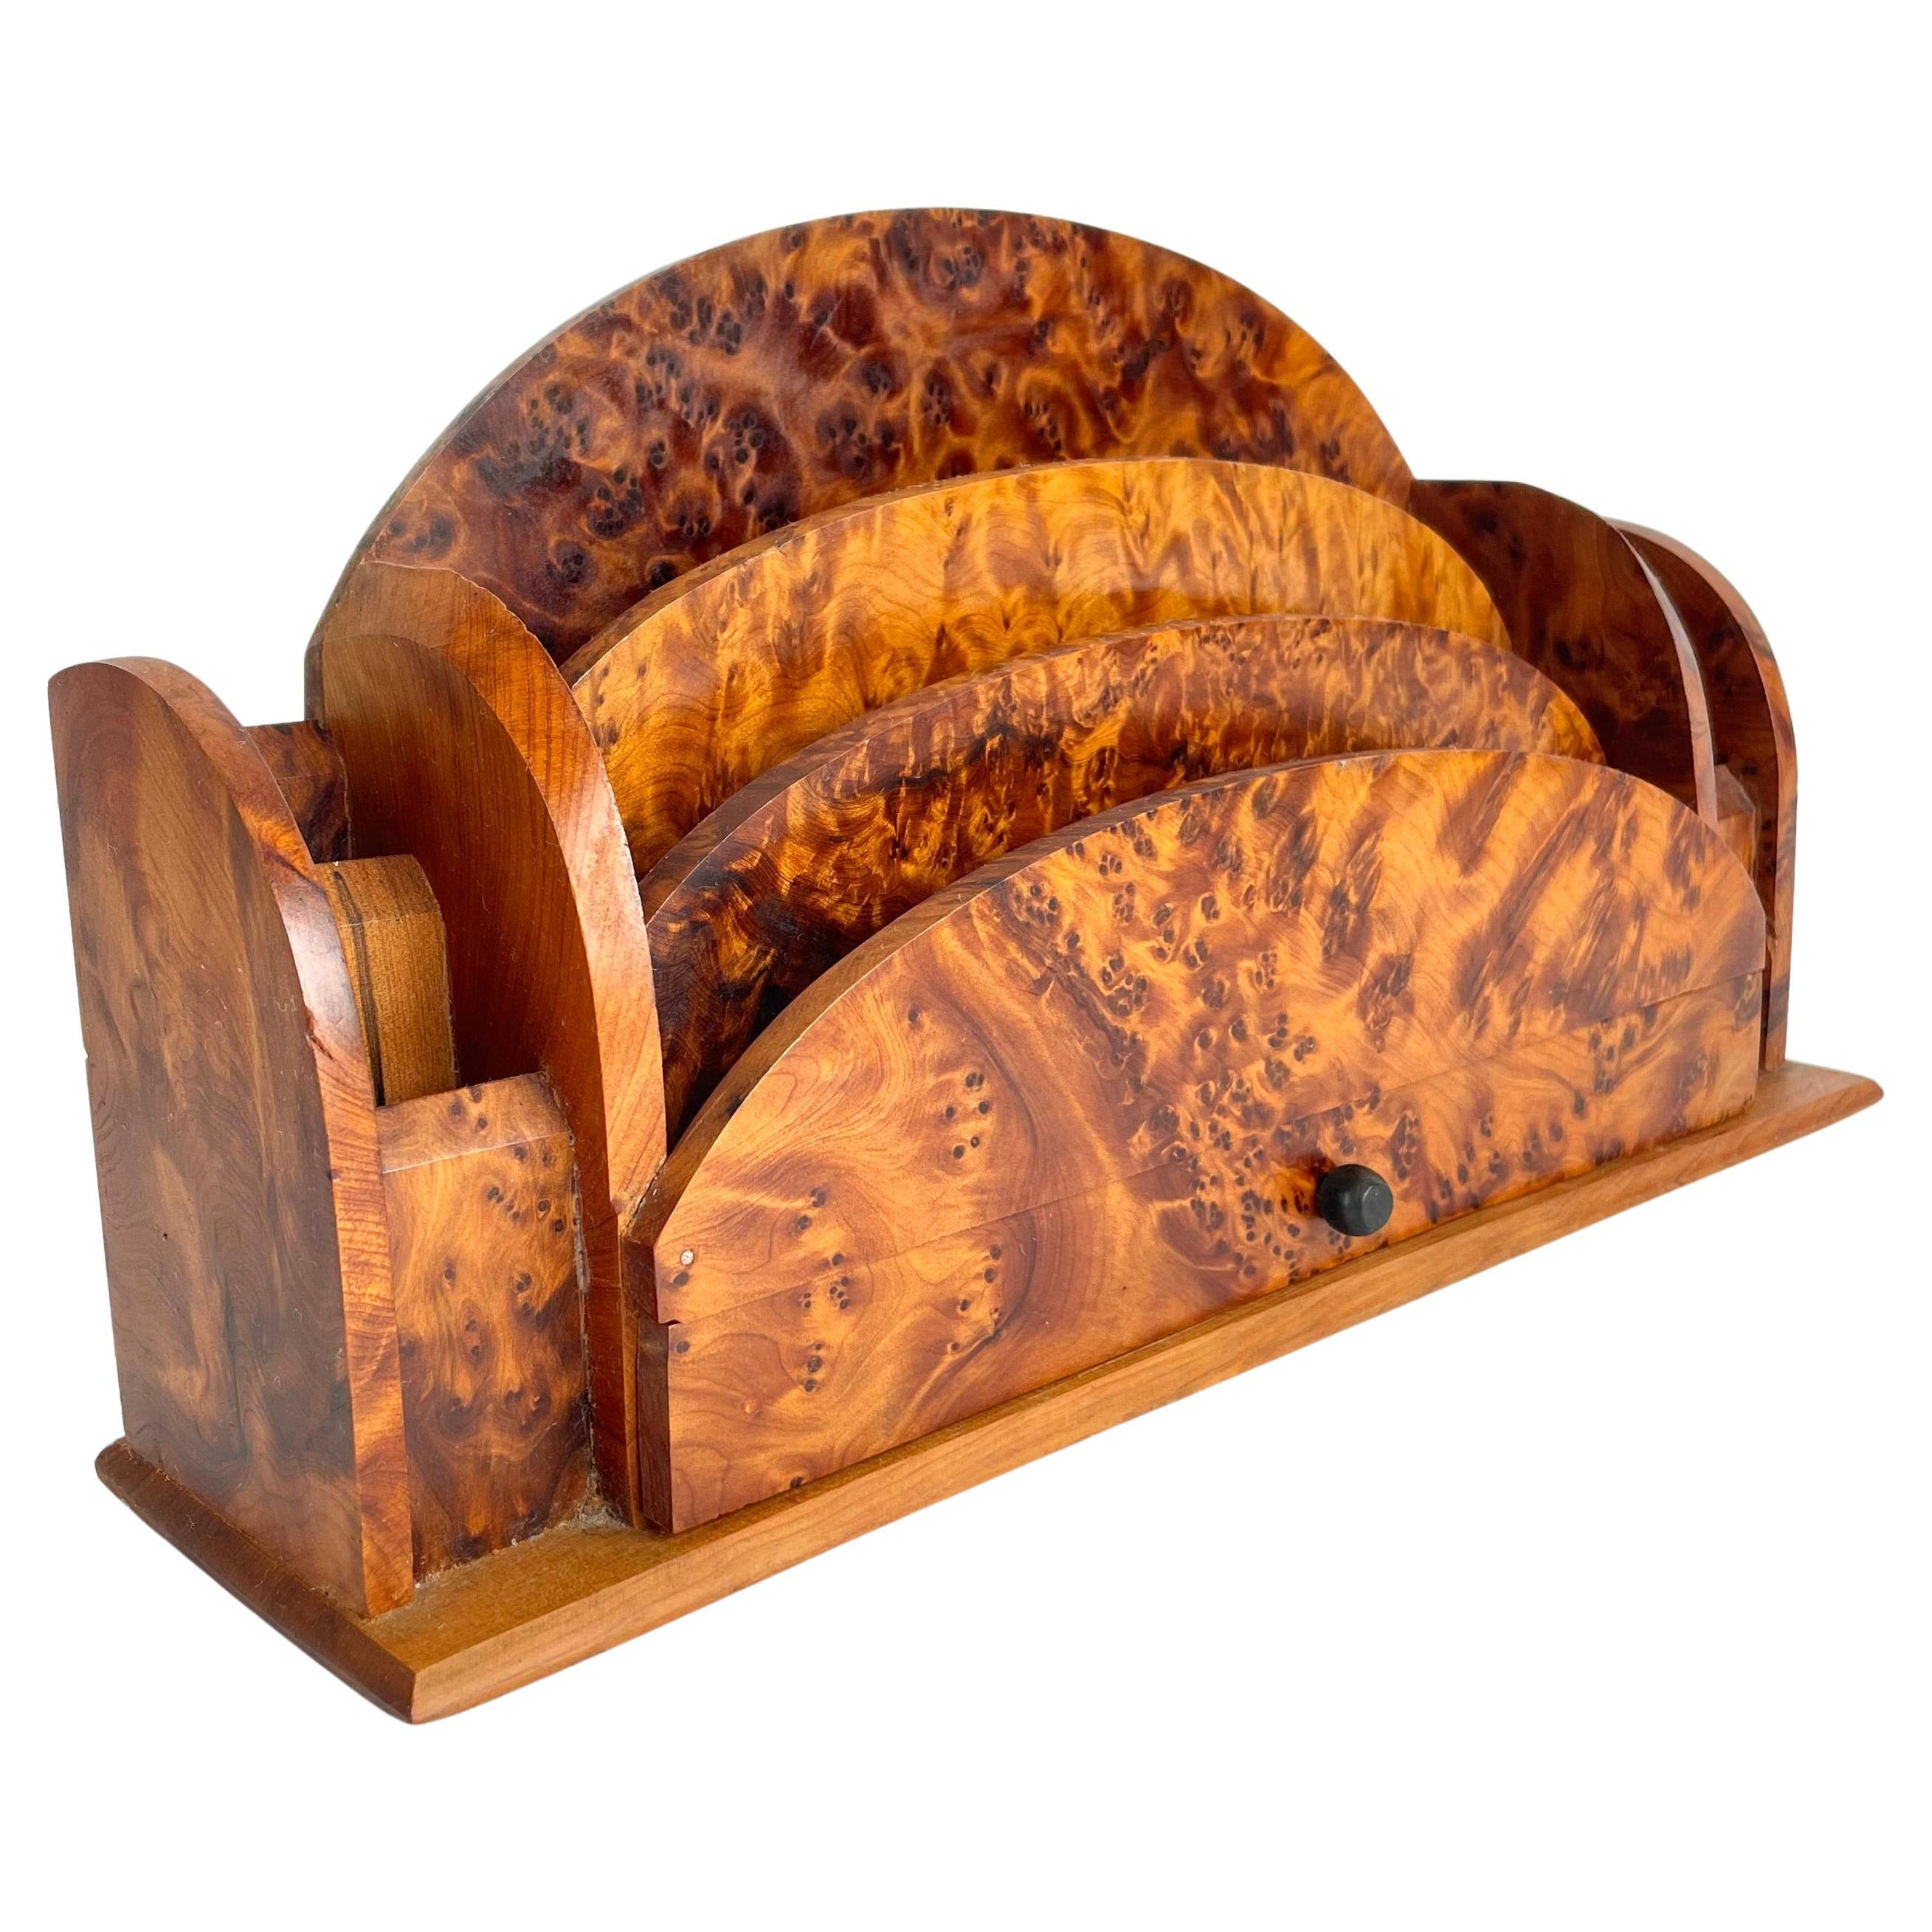 Beautiful Letter Stand in Art Deco with Thuja burl from the 1930s